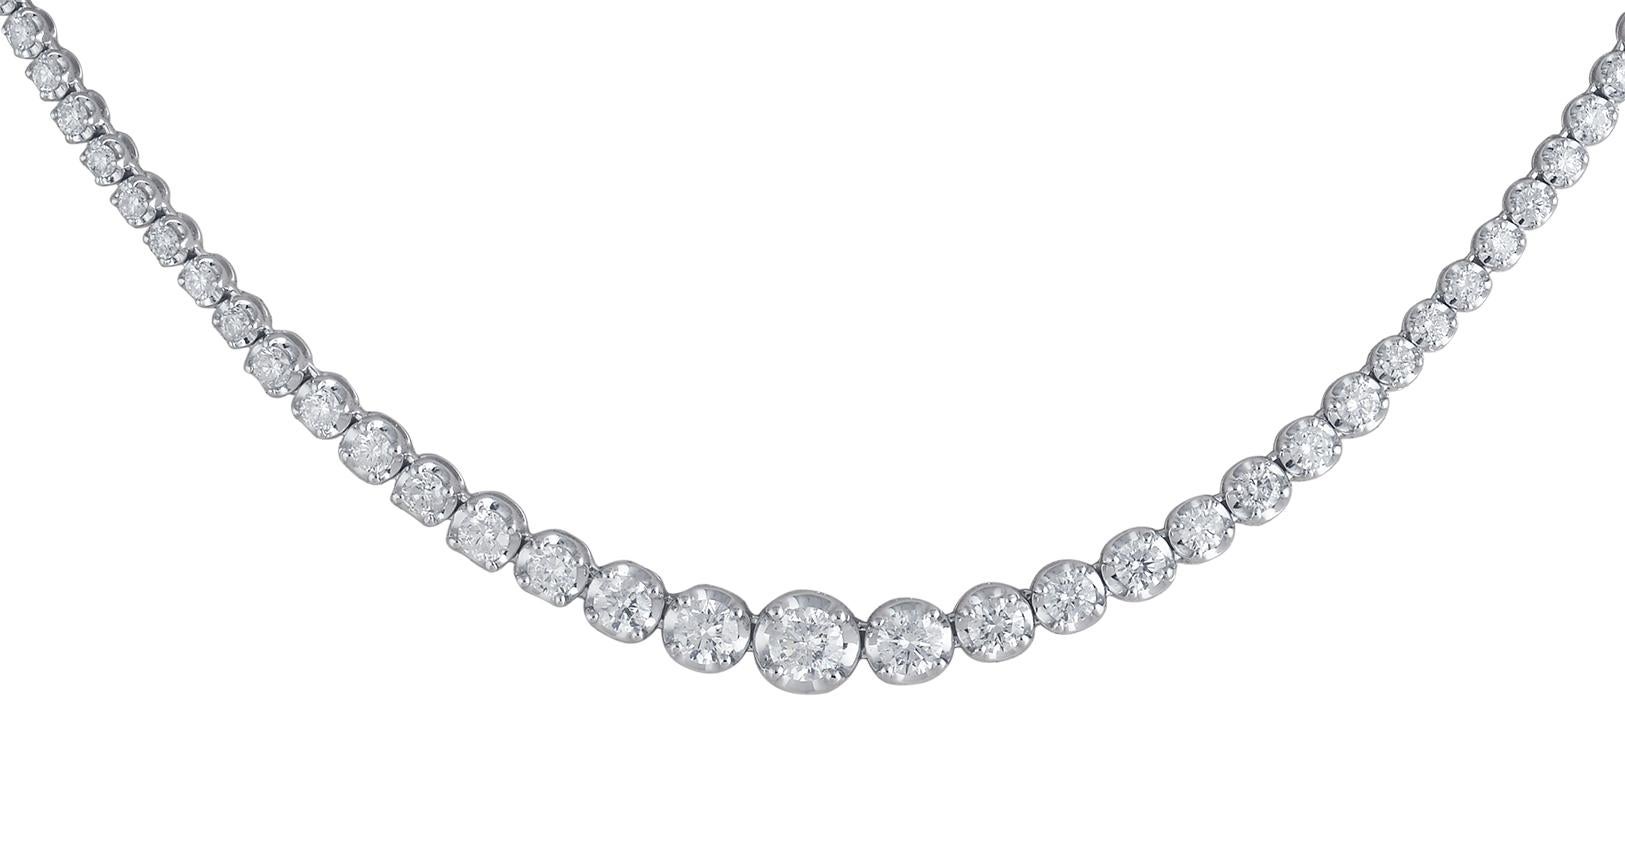 A classic necklace design, this tennis necklace is studded with 107 diamonds in prong setting, crafted beautifully in 14kt Gold. The diamonds are graded H-I Color, I1-I2 Clarity. The Push button clasp provides security that blends seamlessly into